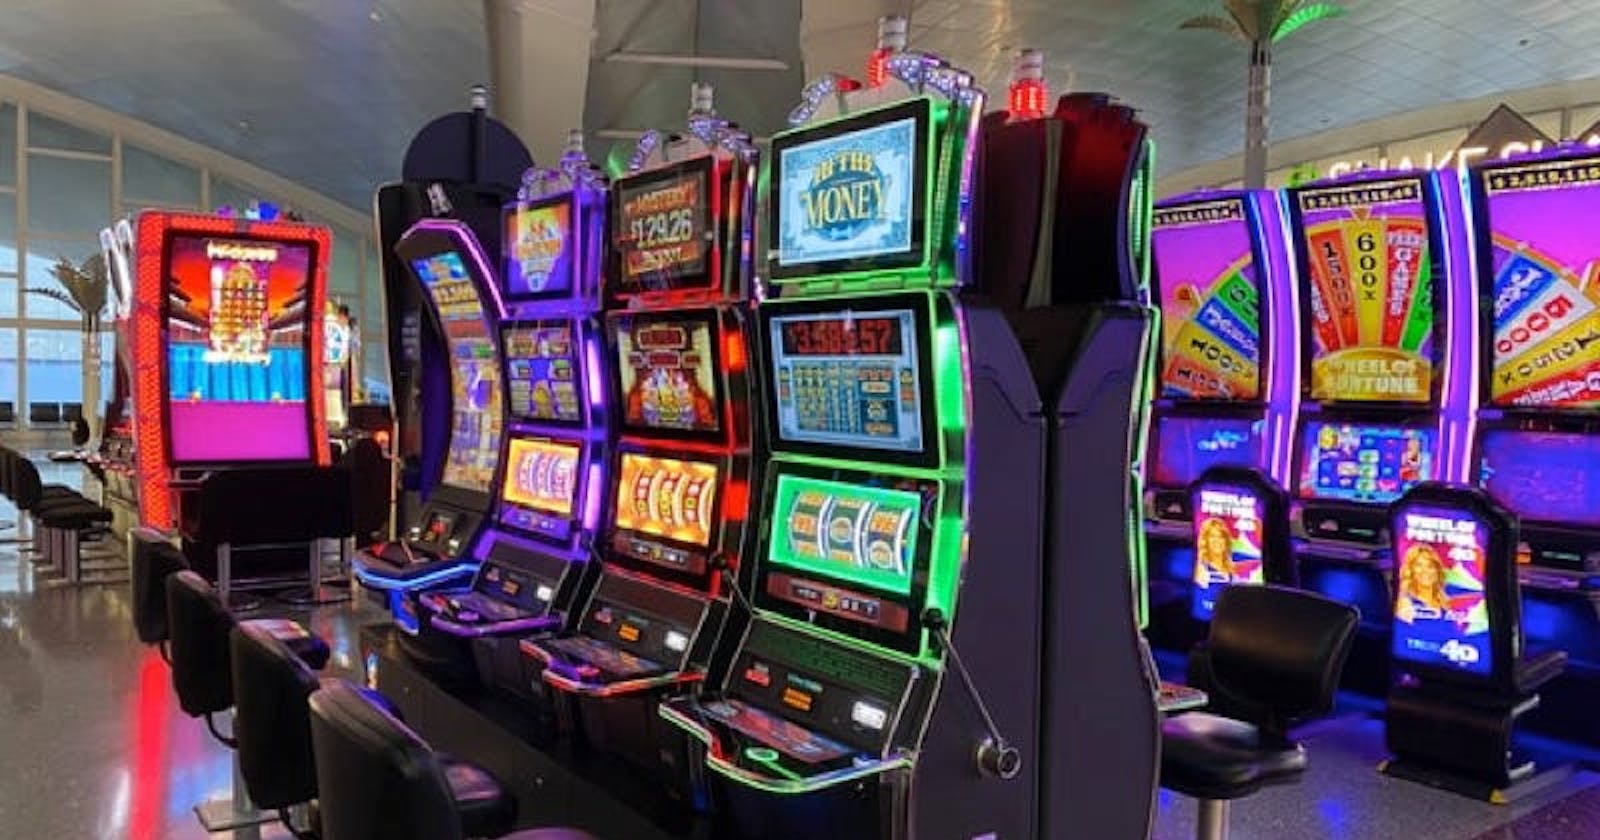 What are the Best Slot Machines to Play? Here Are Top 3 To Play!